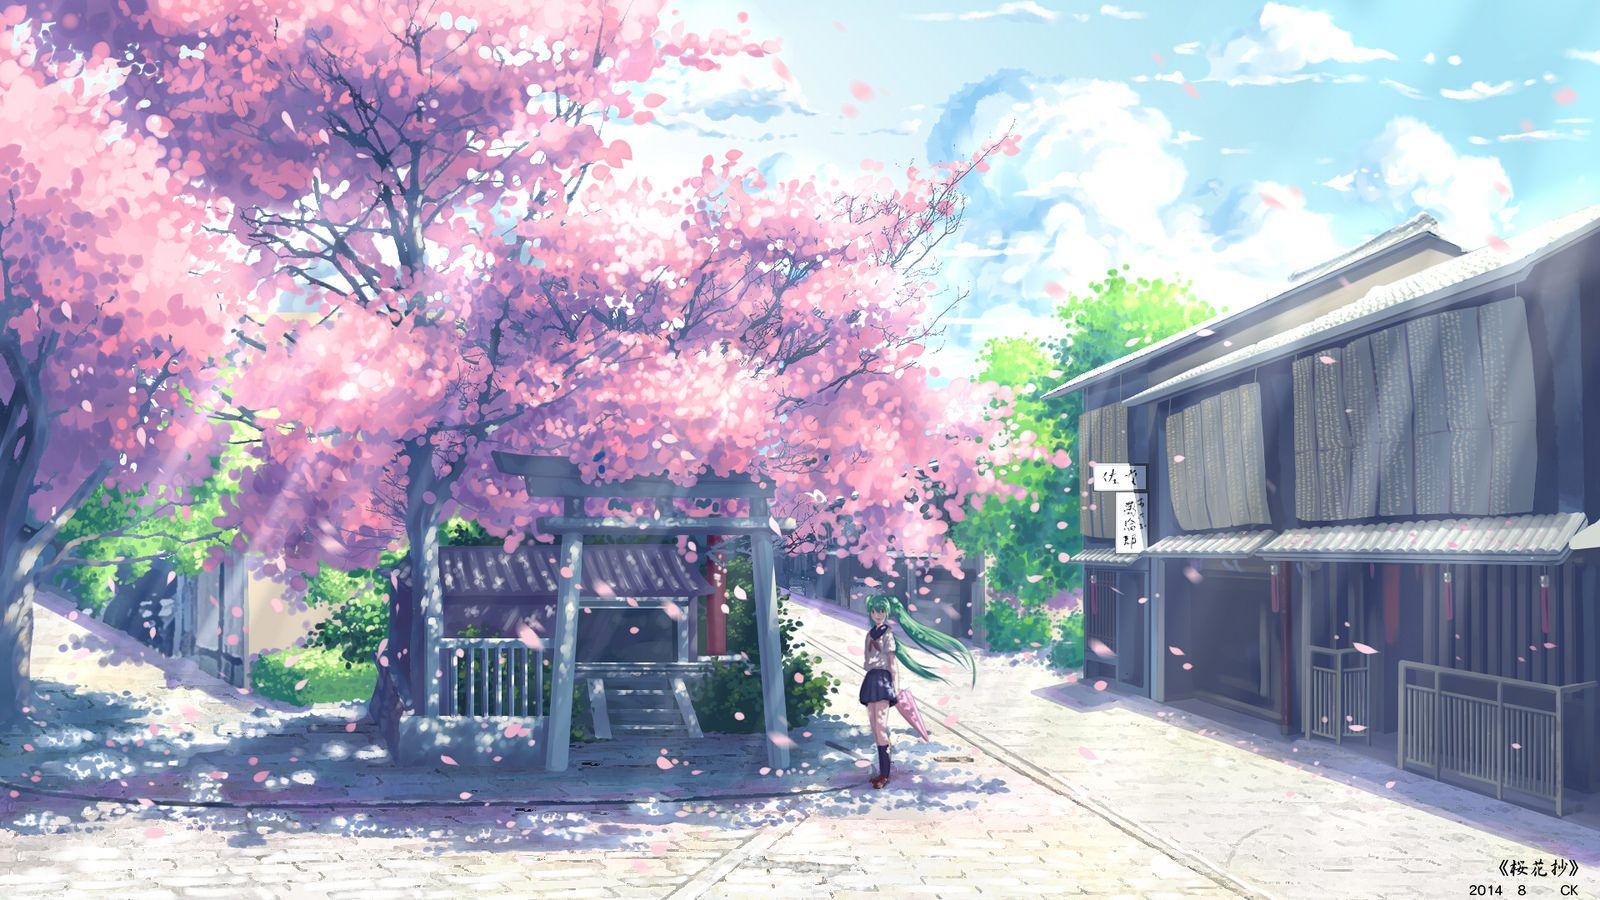 Anime Scenery Cherry Blossoms Background Hd Image 1_28214060692_o. Anime Background Wallpaper, Anime Wallpaper 1920x Anime Cherry Blossom